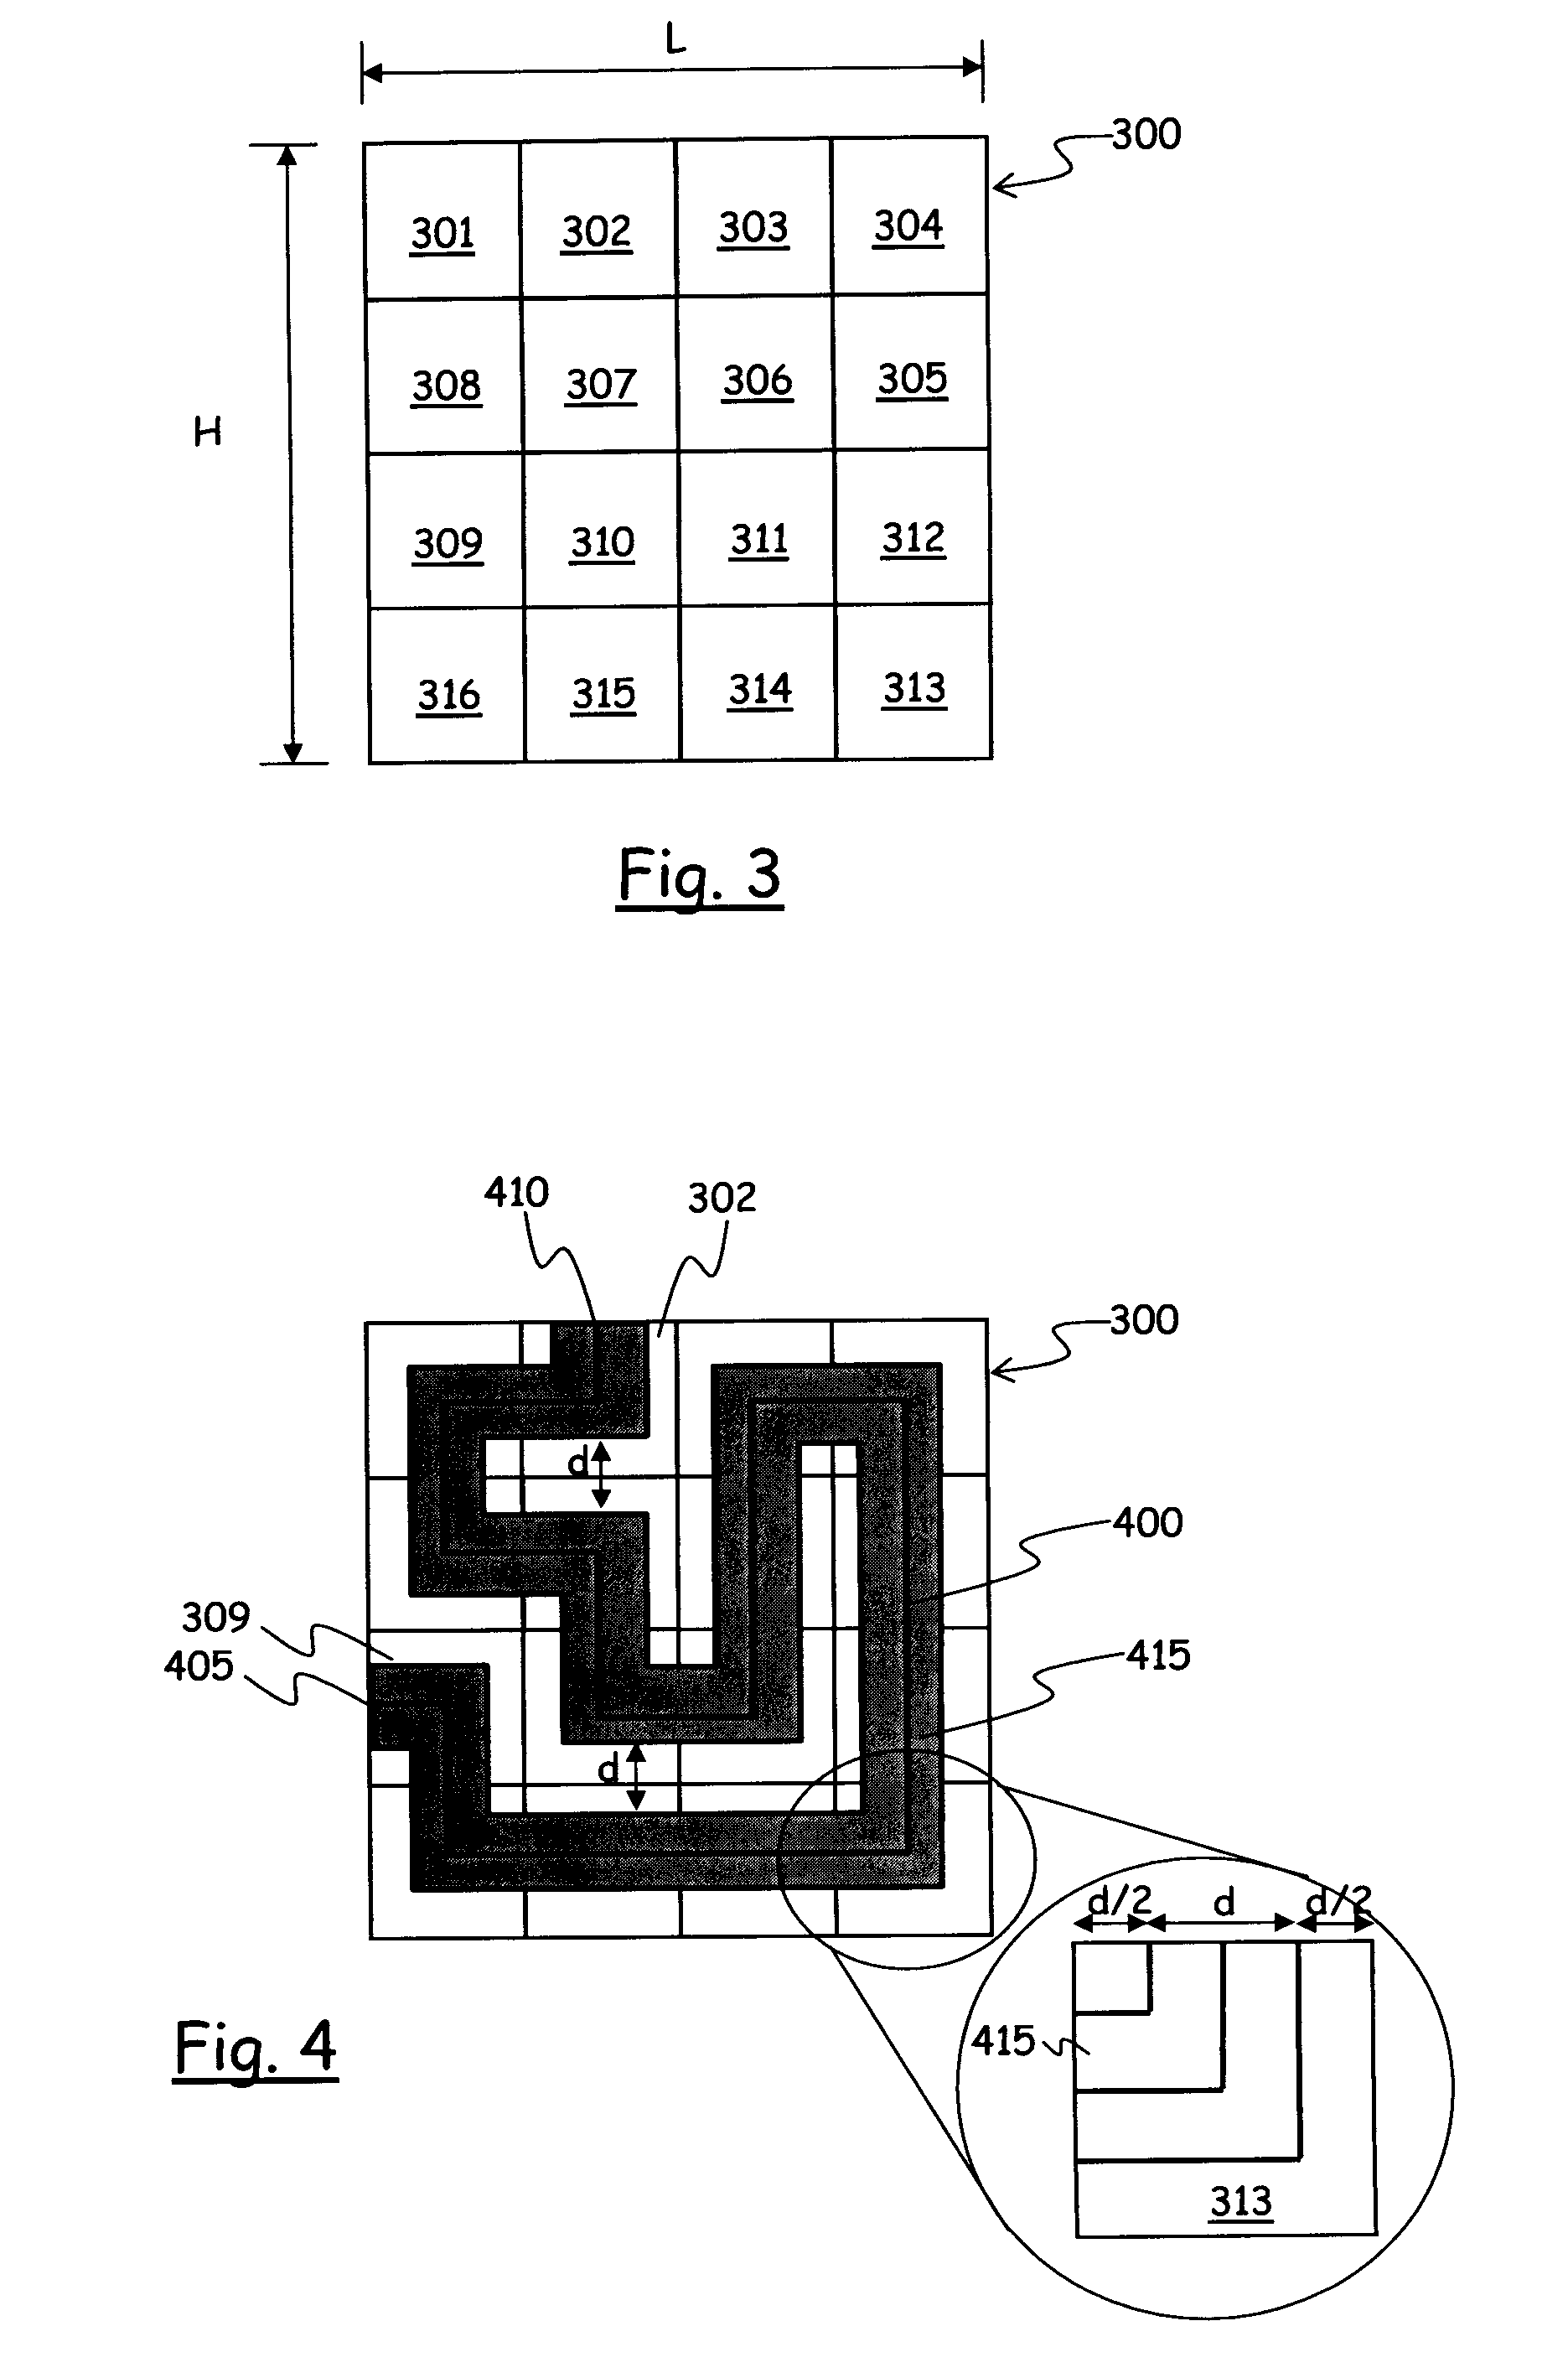 Tamper-proof structures for protectig electronic modules